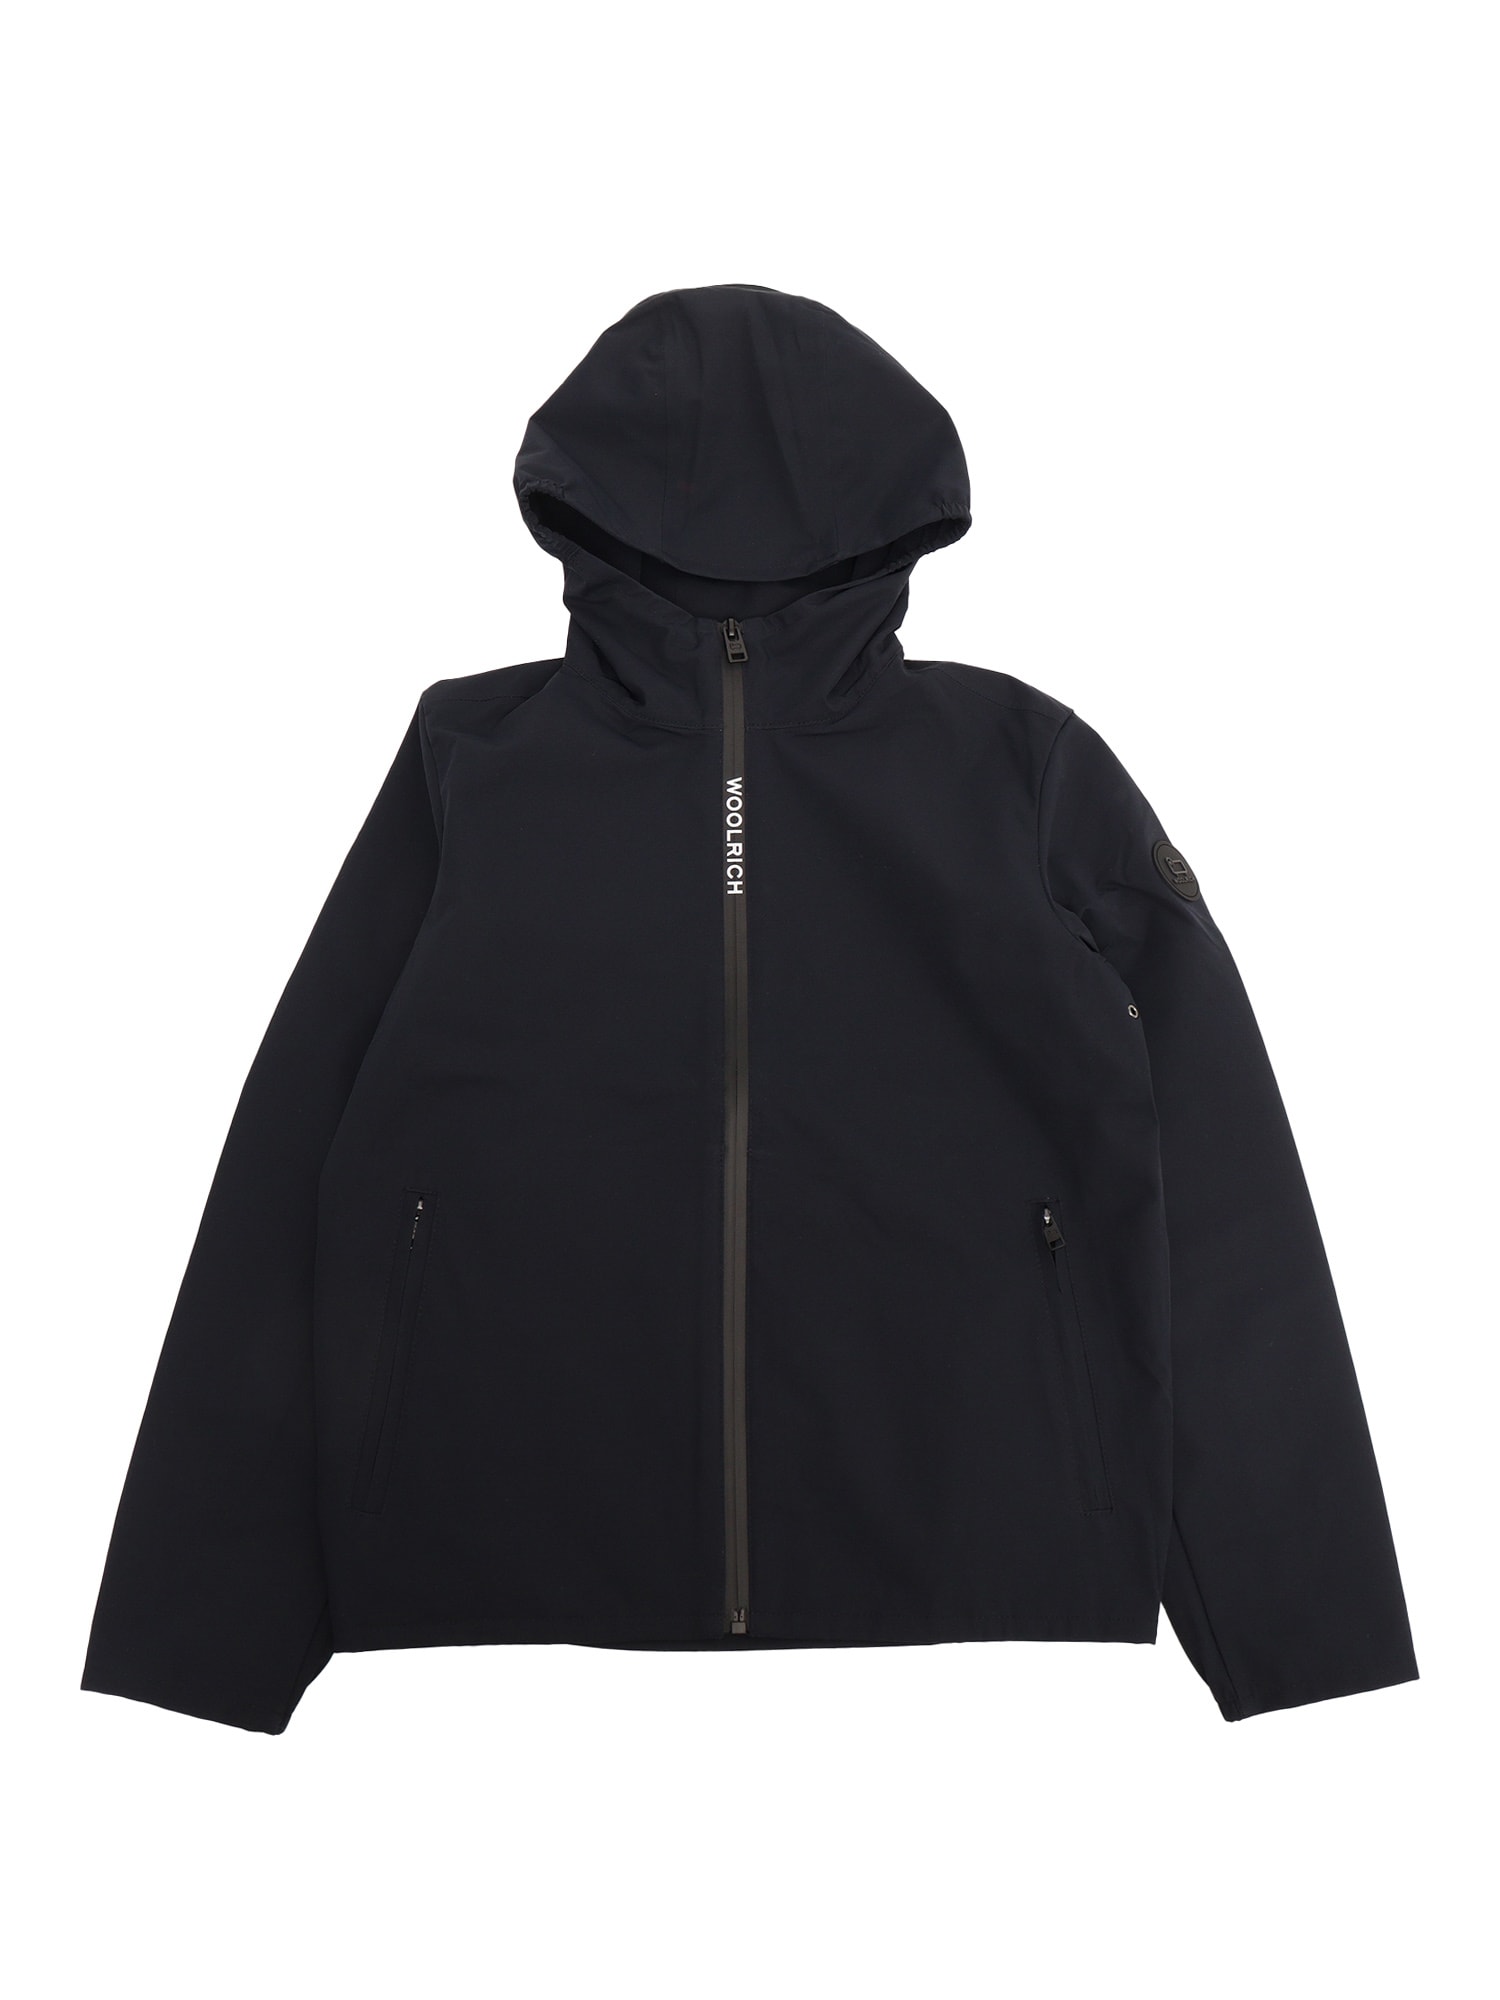 WOOLRICH PACIFIC JACKET